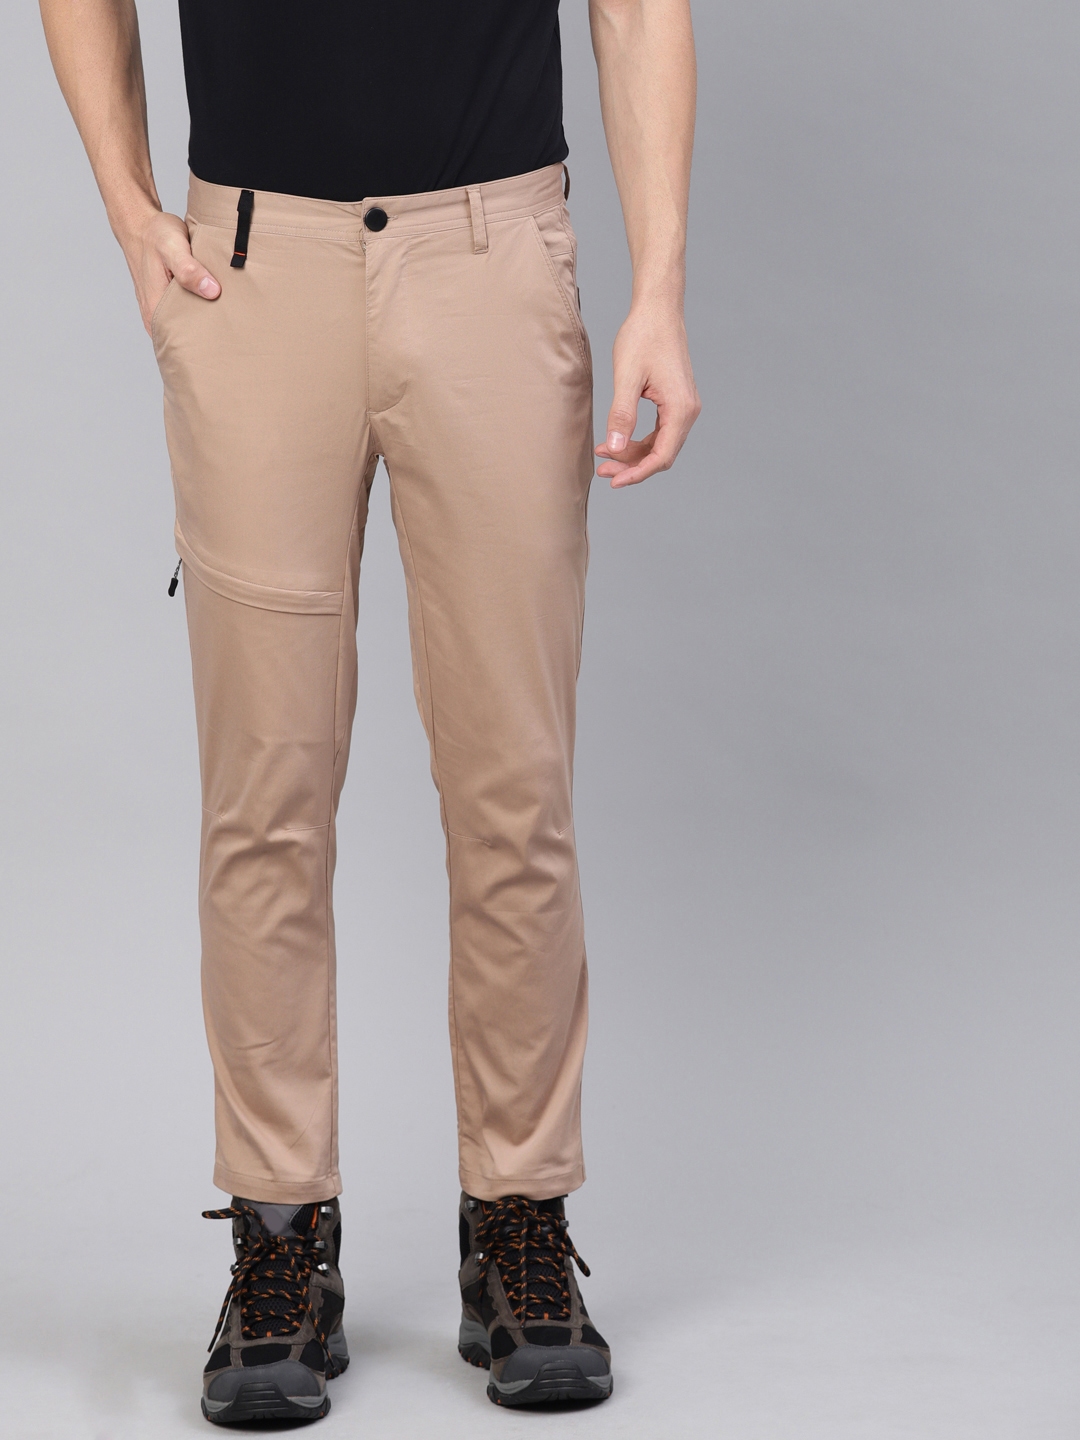 HRX Trousers outlet  1800 products on sale  FASHIOLAcouk